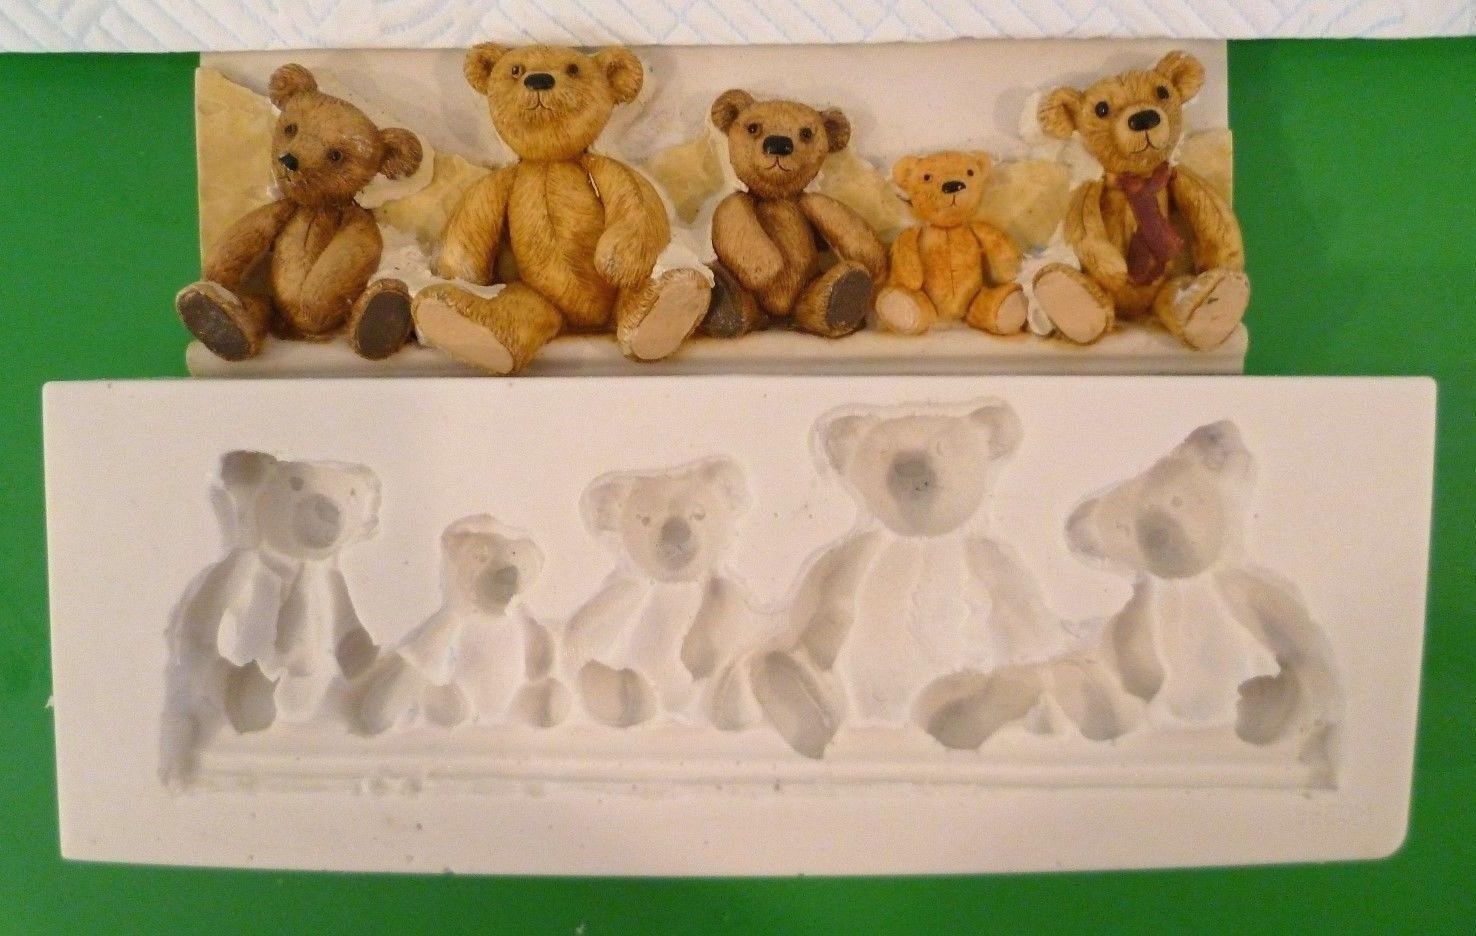 LARGE TEDDY BEAR BORDER SILICONE MOULD